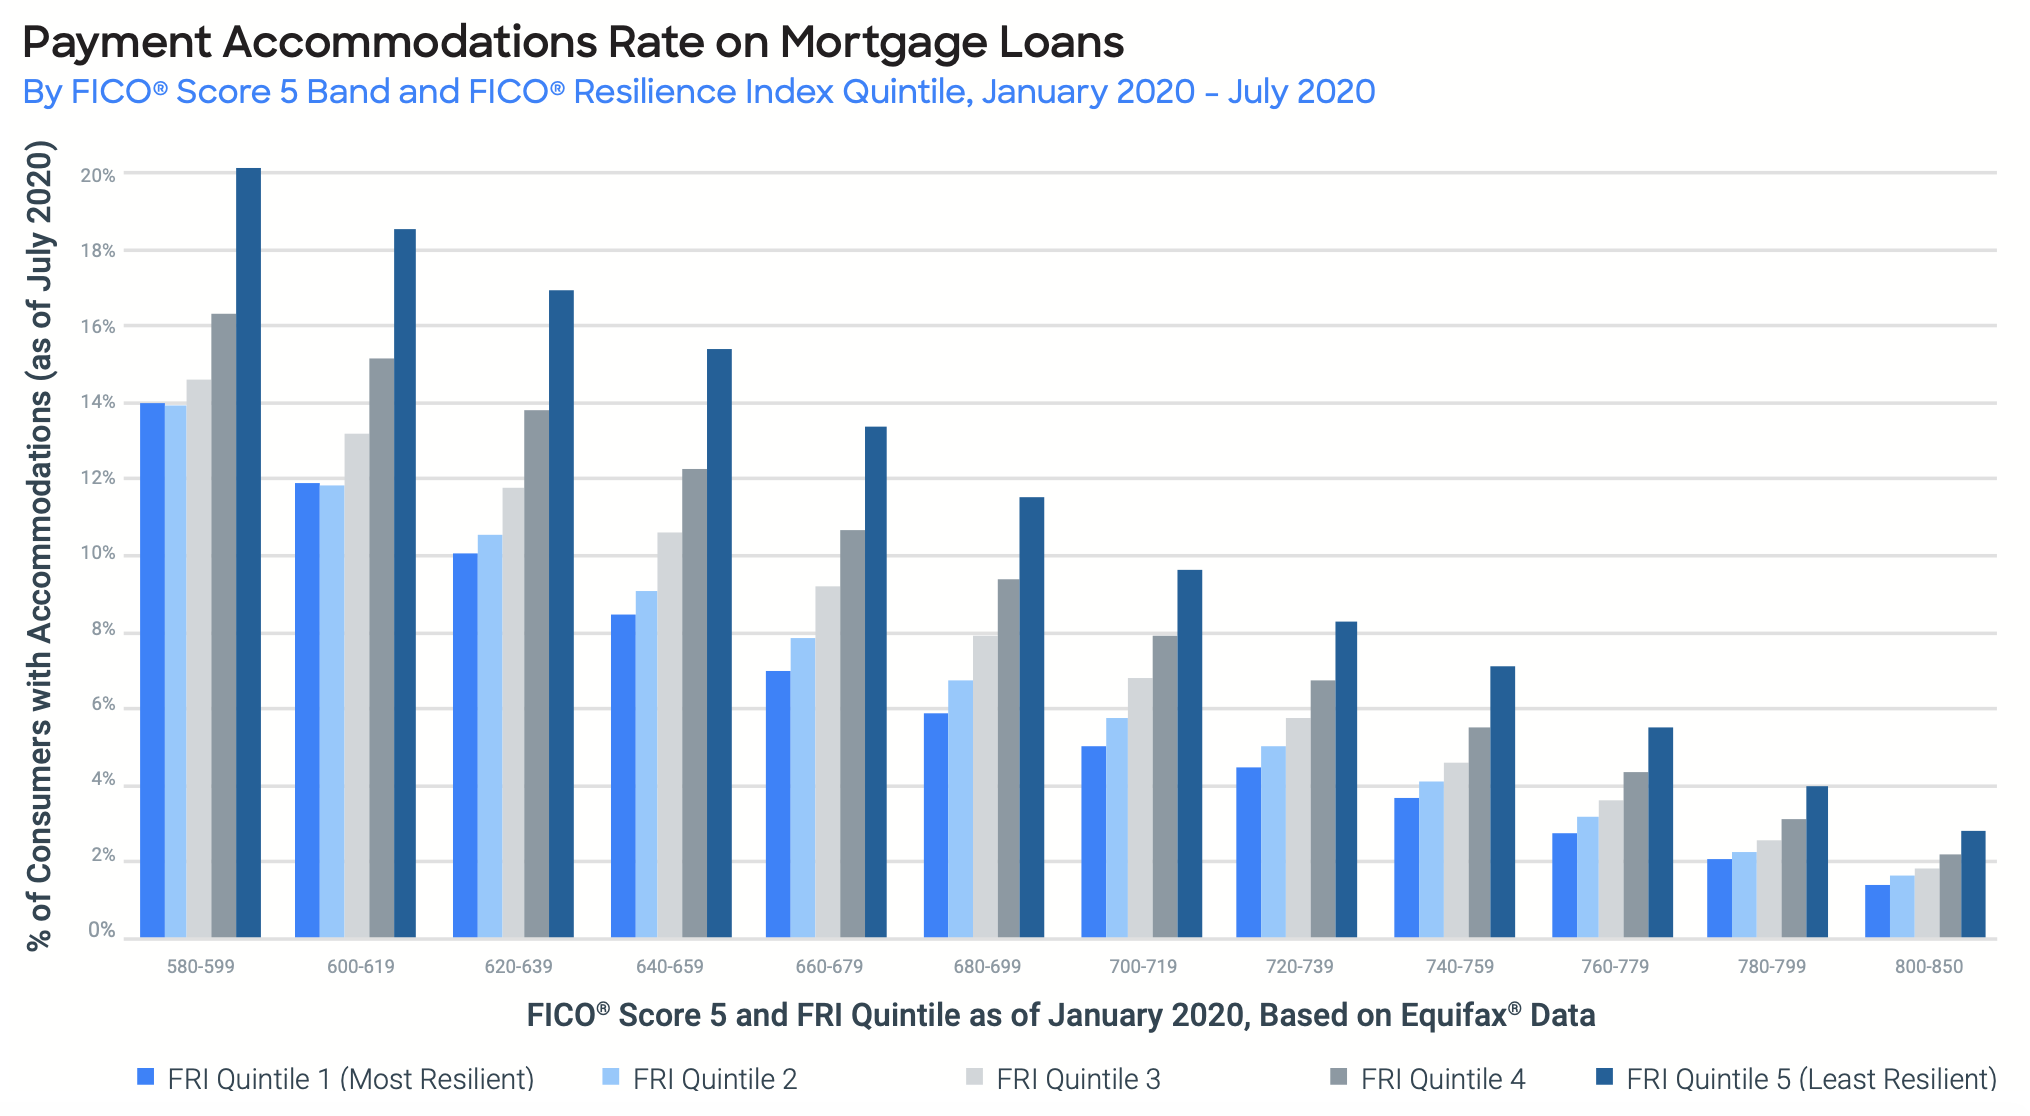 Payment Accommodation Rate on Mortgage Loans